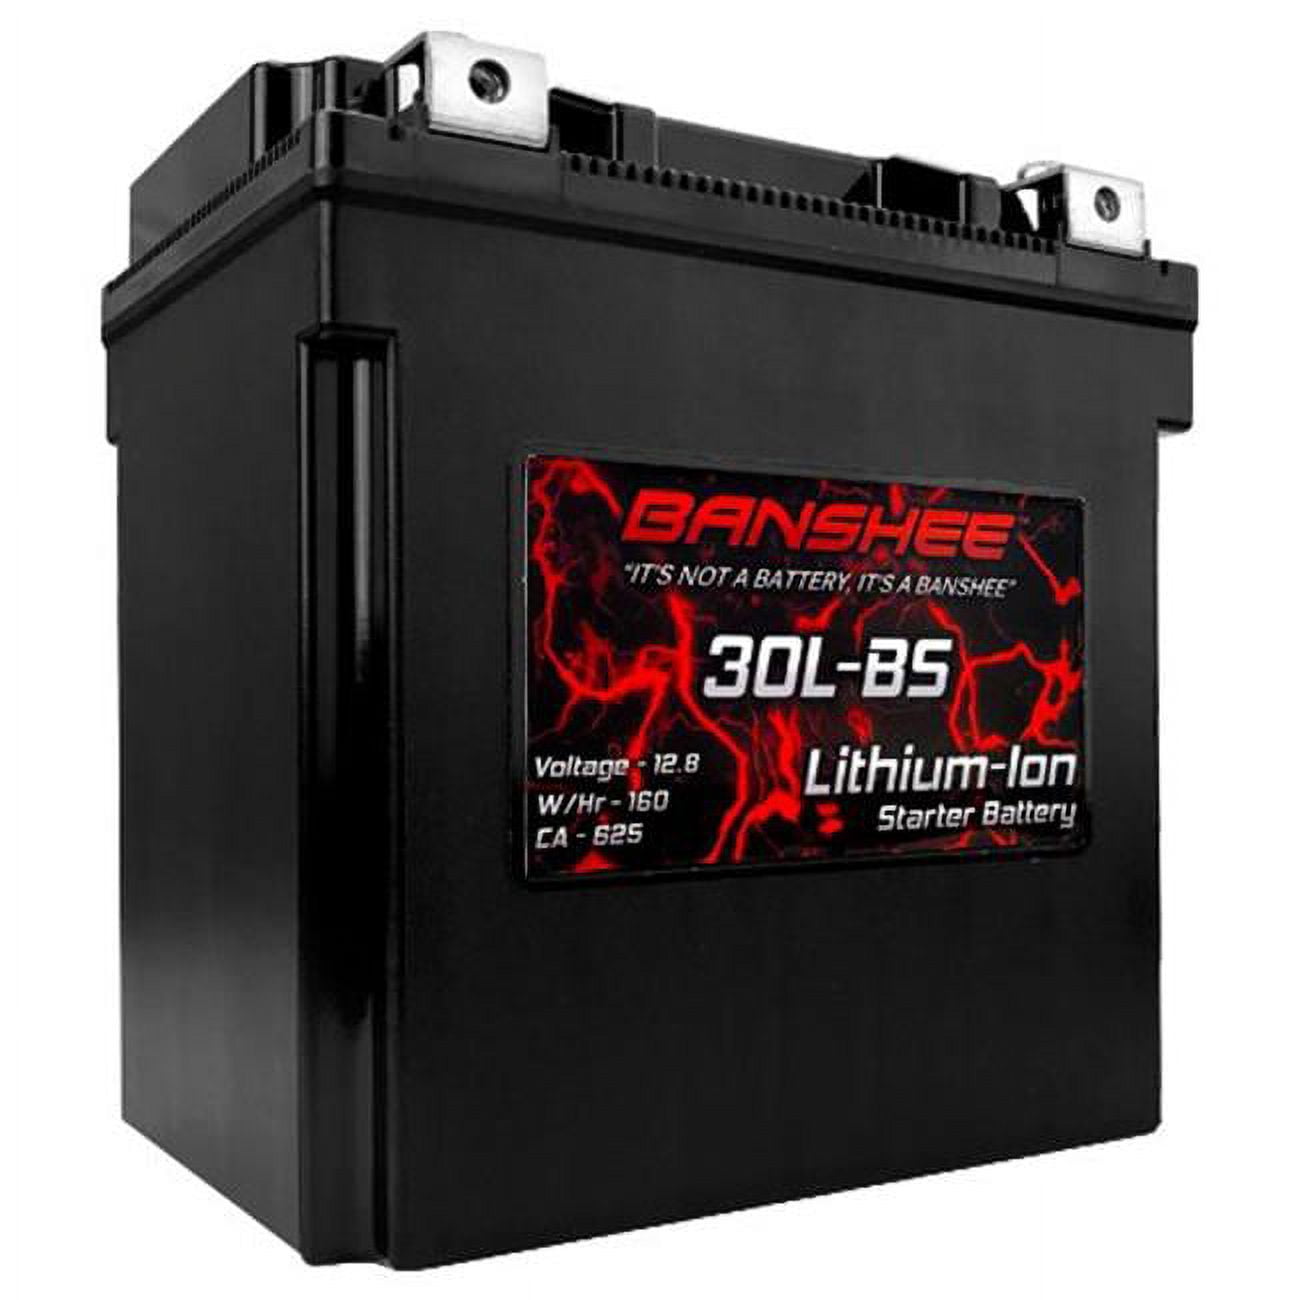 Picture of Banshee DLFP30L-BS-04 12.8V Lightweight Lithium-Ion Battery for Replacement ETX30L-BS YTX30L-BS Harley Yuasa Powersports